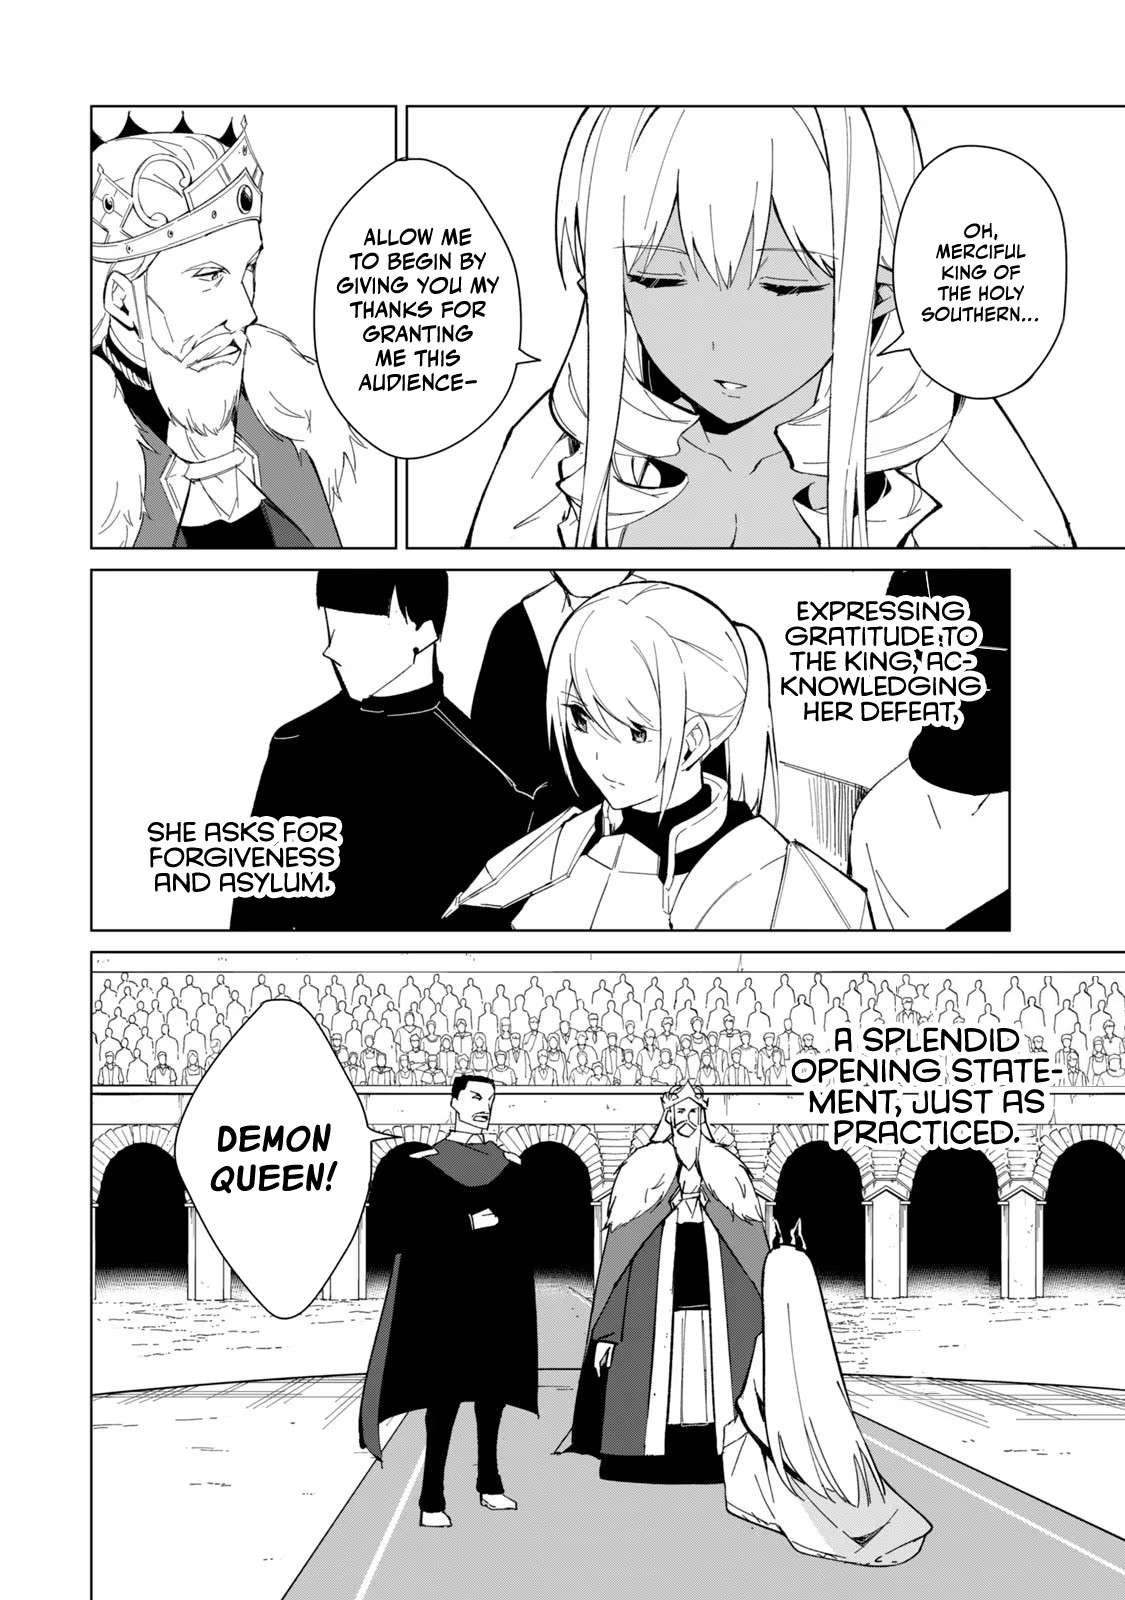 A Story About a Hero Exterminating a Dragon-Class Beautiful Girl Demon King, Who Has Very Low Self-Esteem, With Love! - chapter 24 - #3